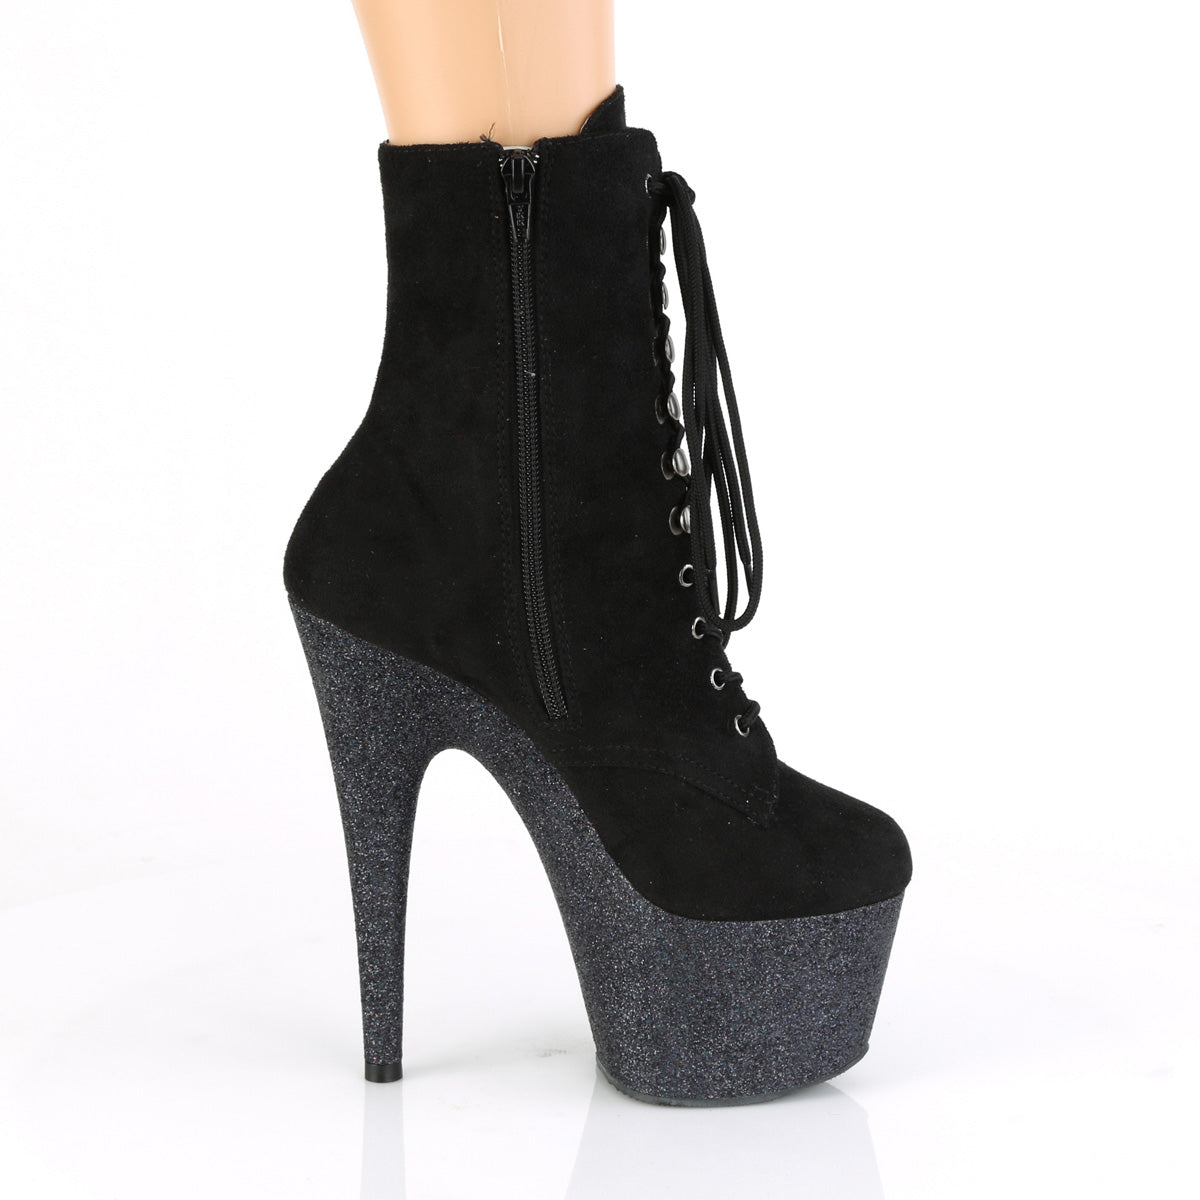 ADORE-1020FSMG Ankle Boots